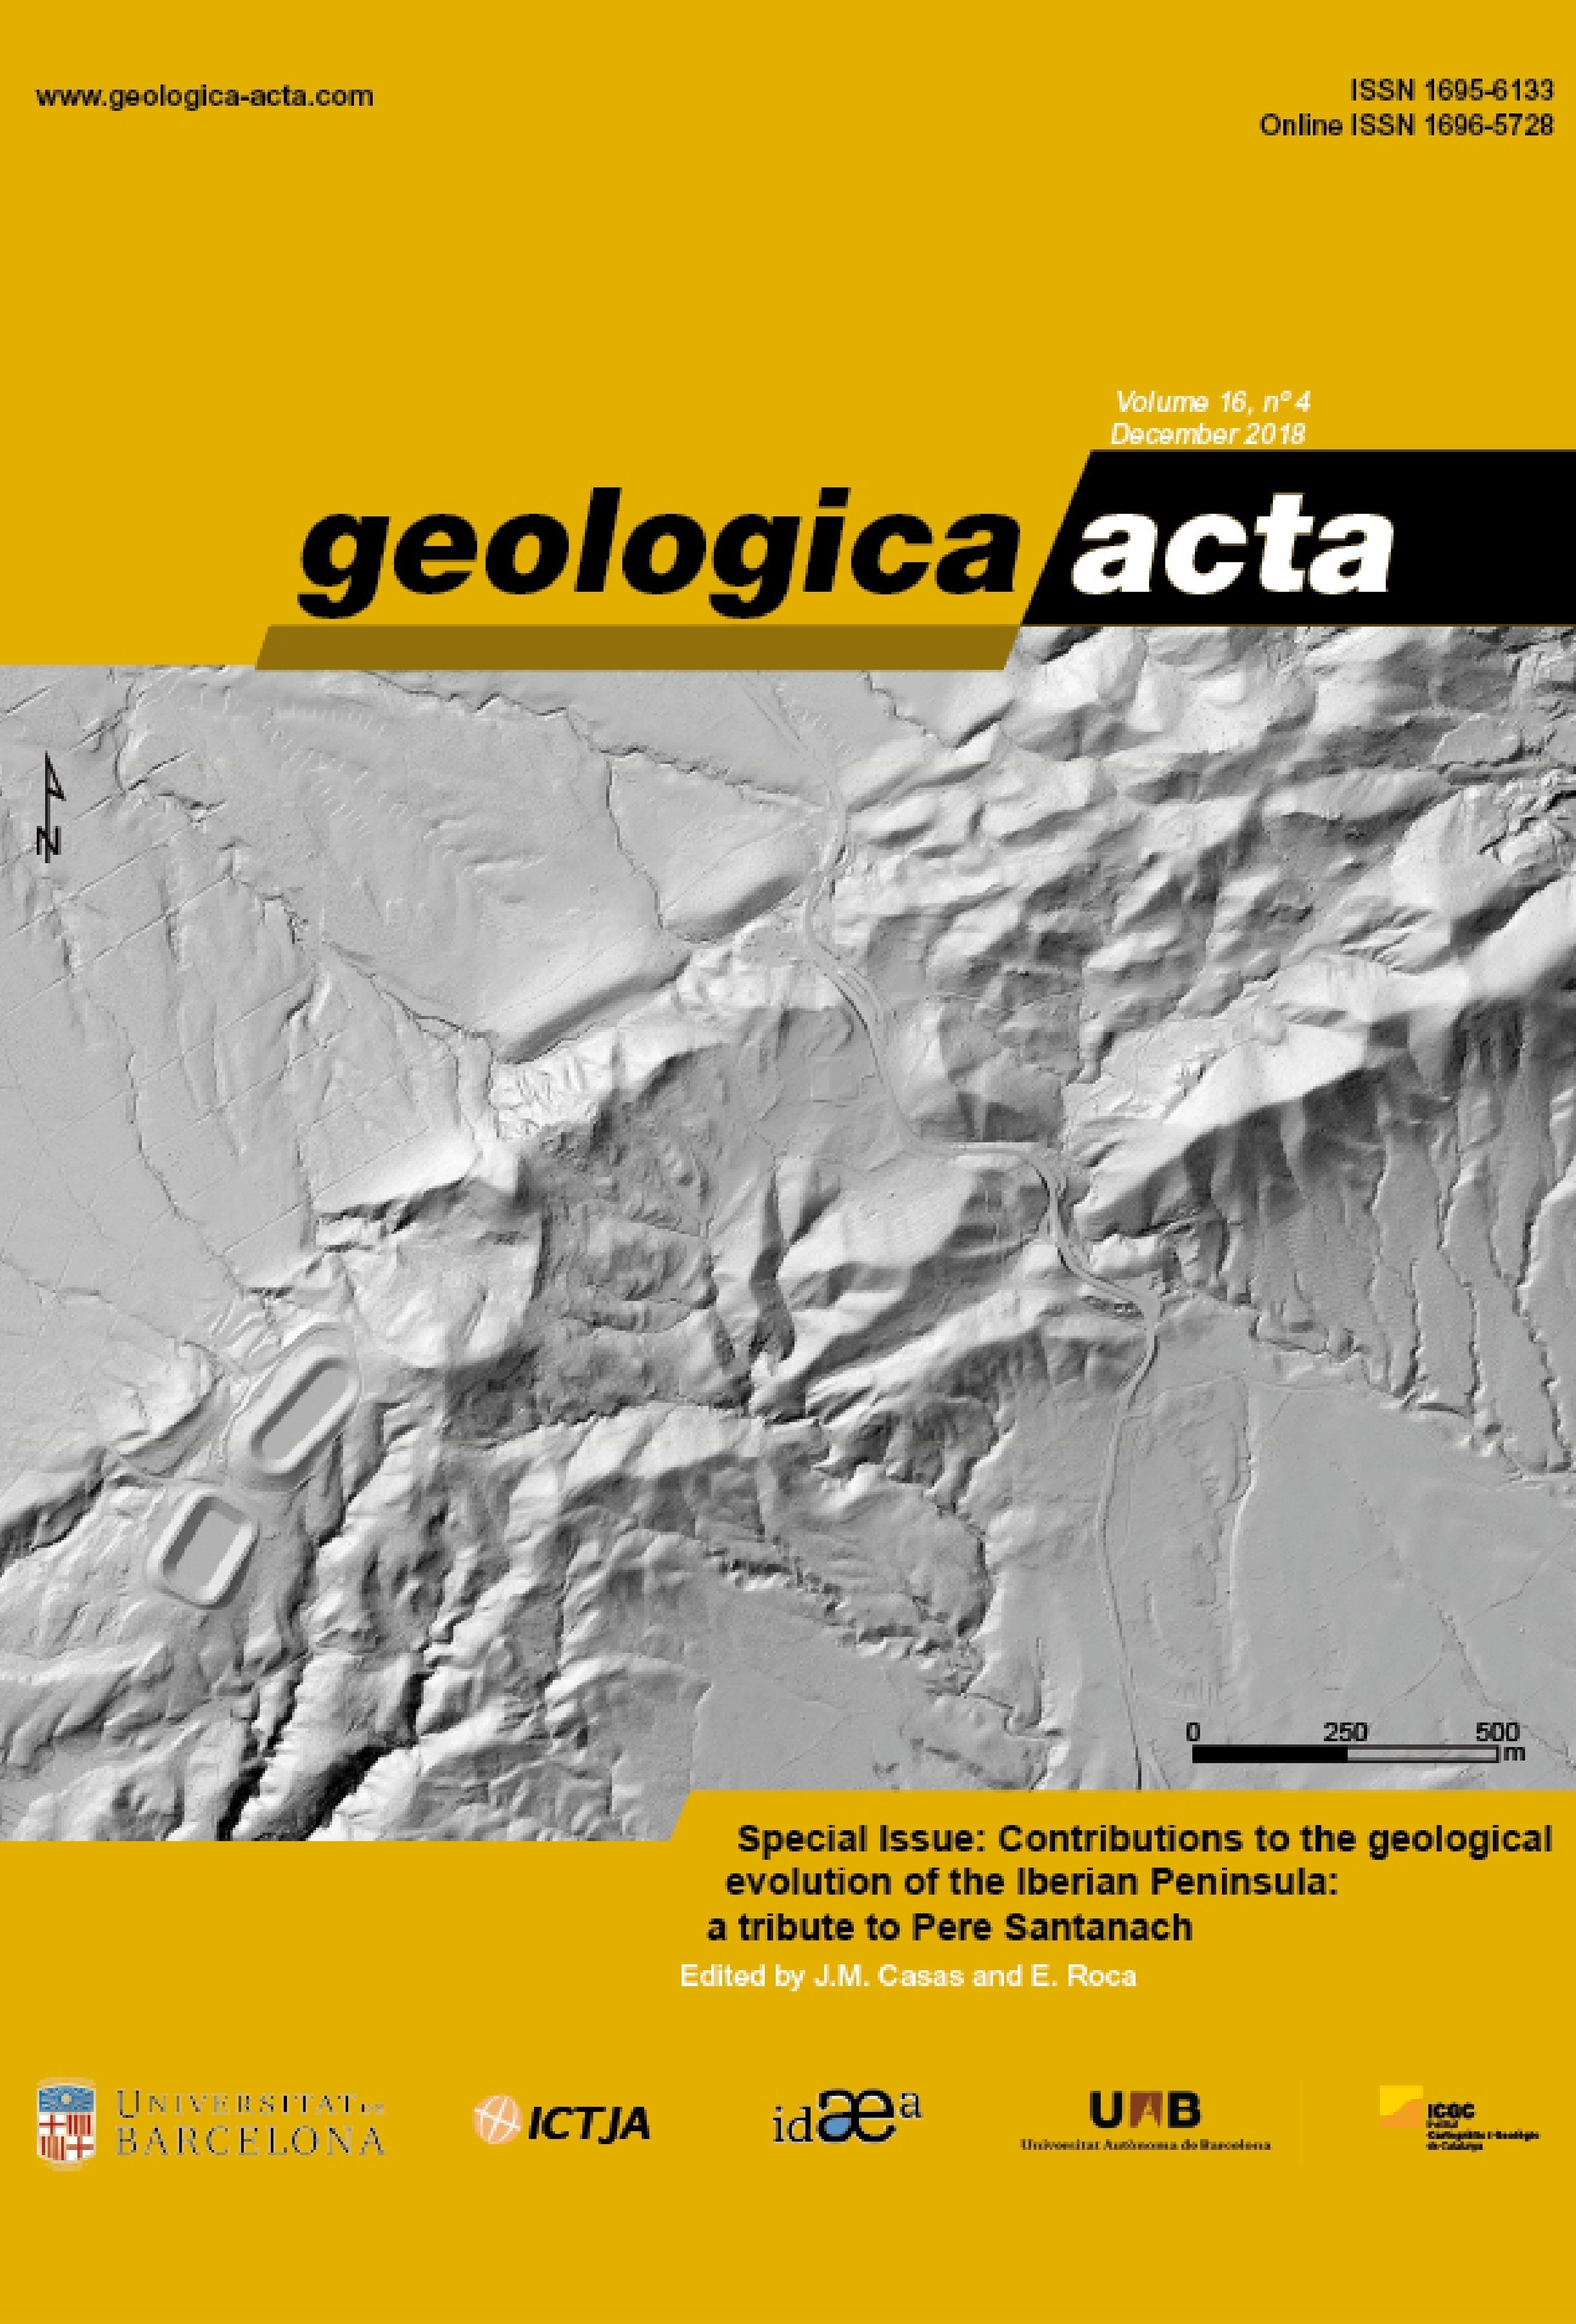 					View Vol. 16 No. 4 (2018): Contributions to the geological evolution of the Iberian Peninsula: a tribute to Pere Santanach
				